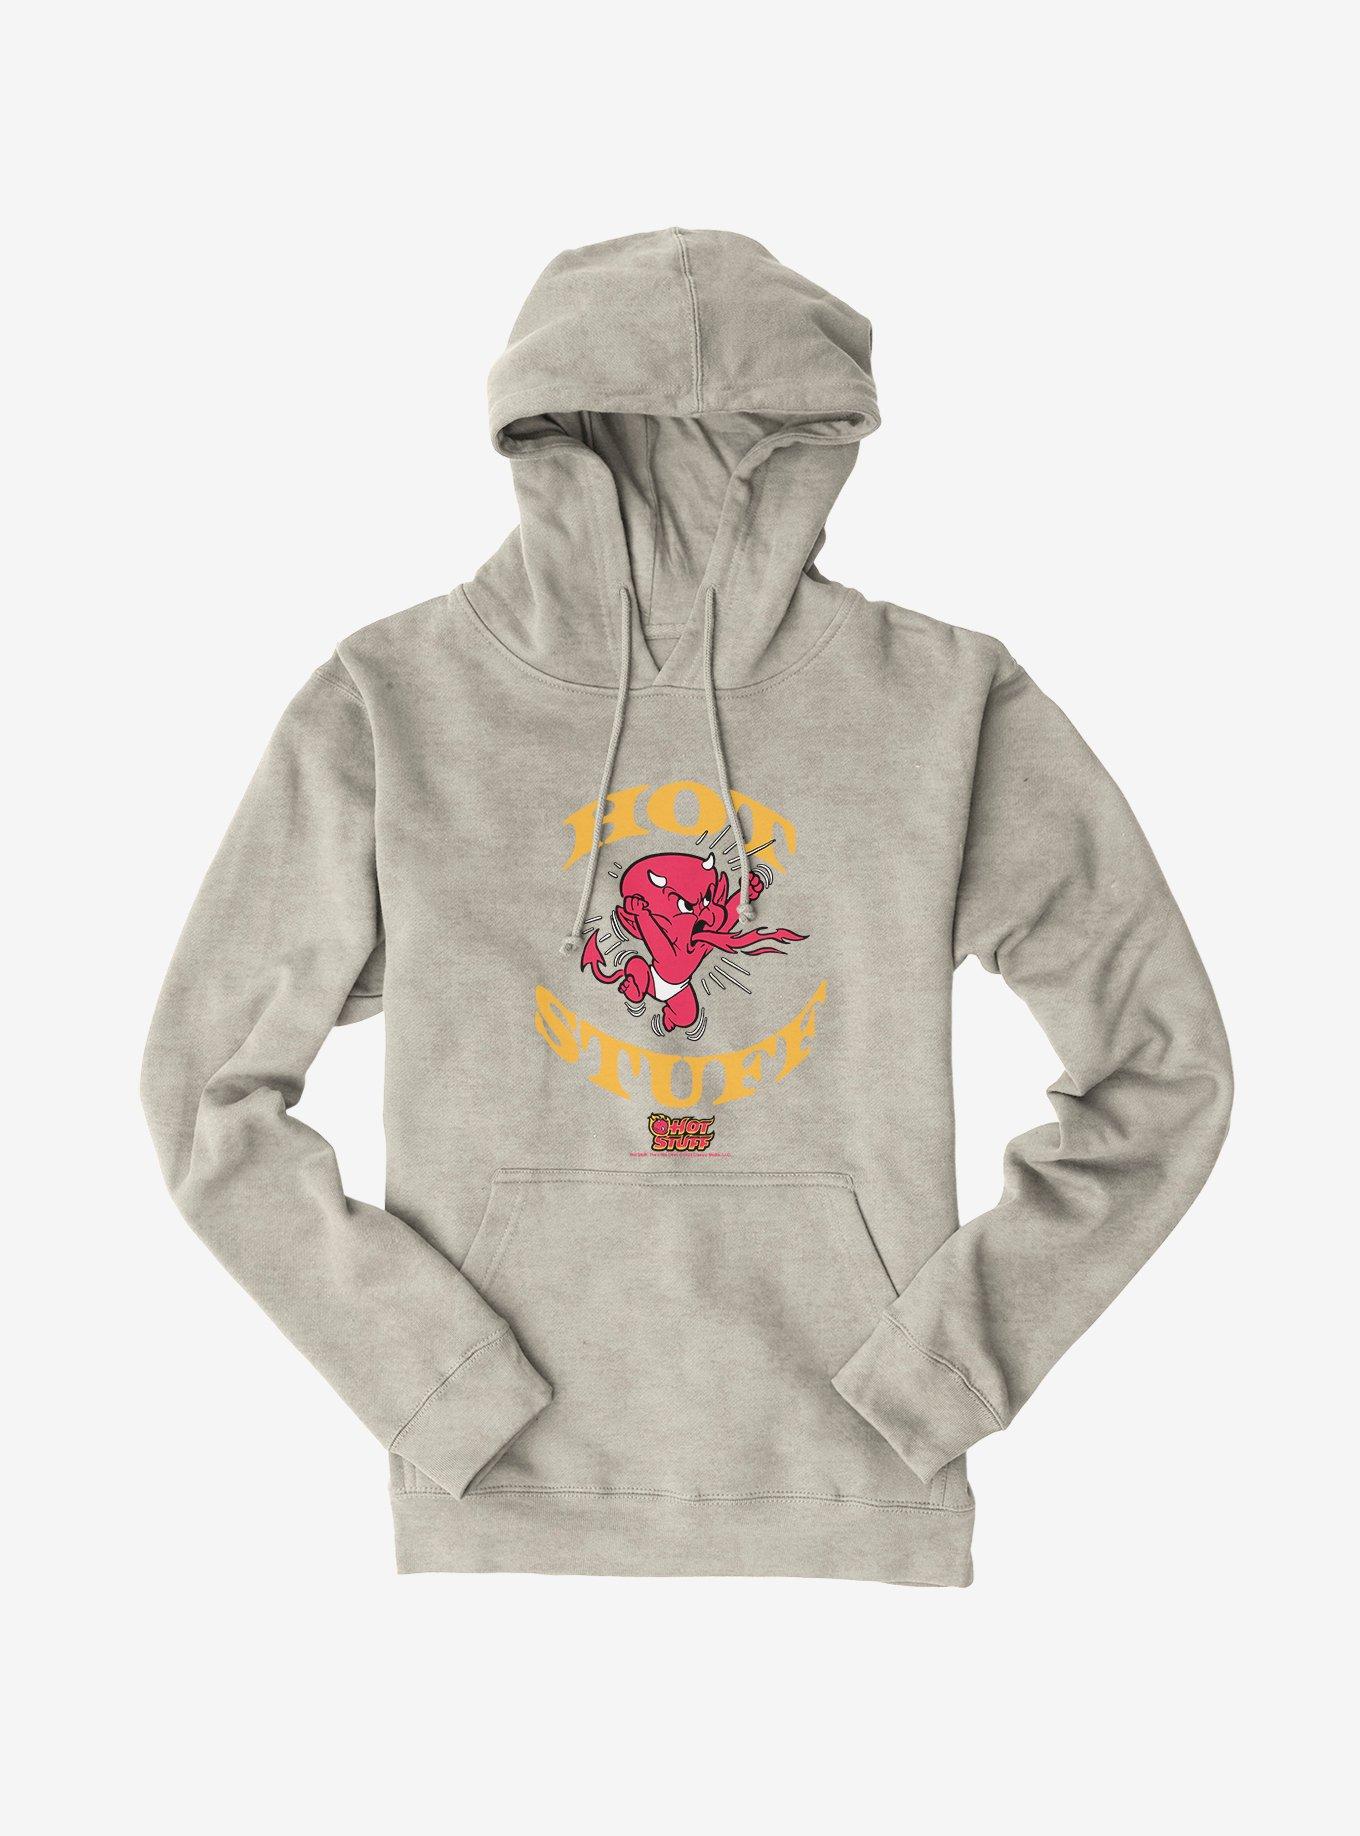 Hot Stuff The Little Devil Spitting Out Fire Hoodie, OATMEAL HEATHER, hi-res